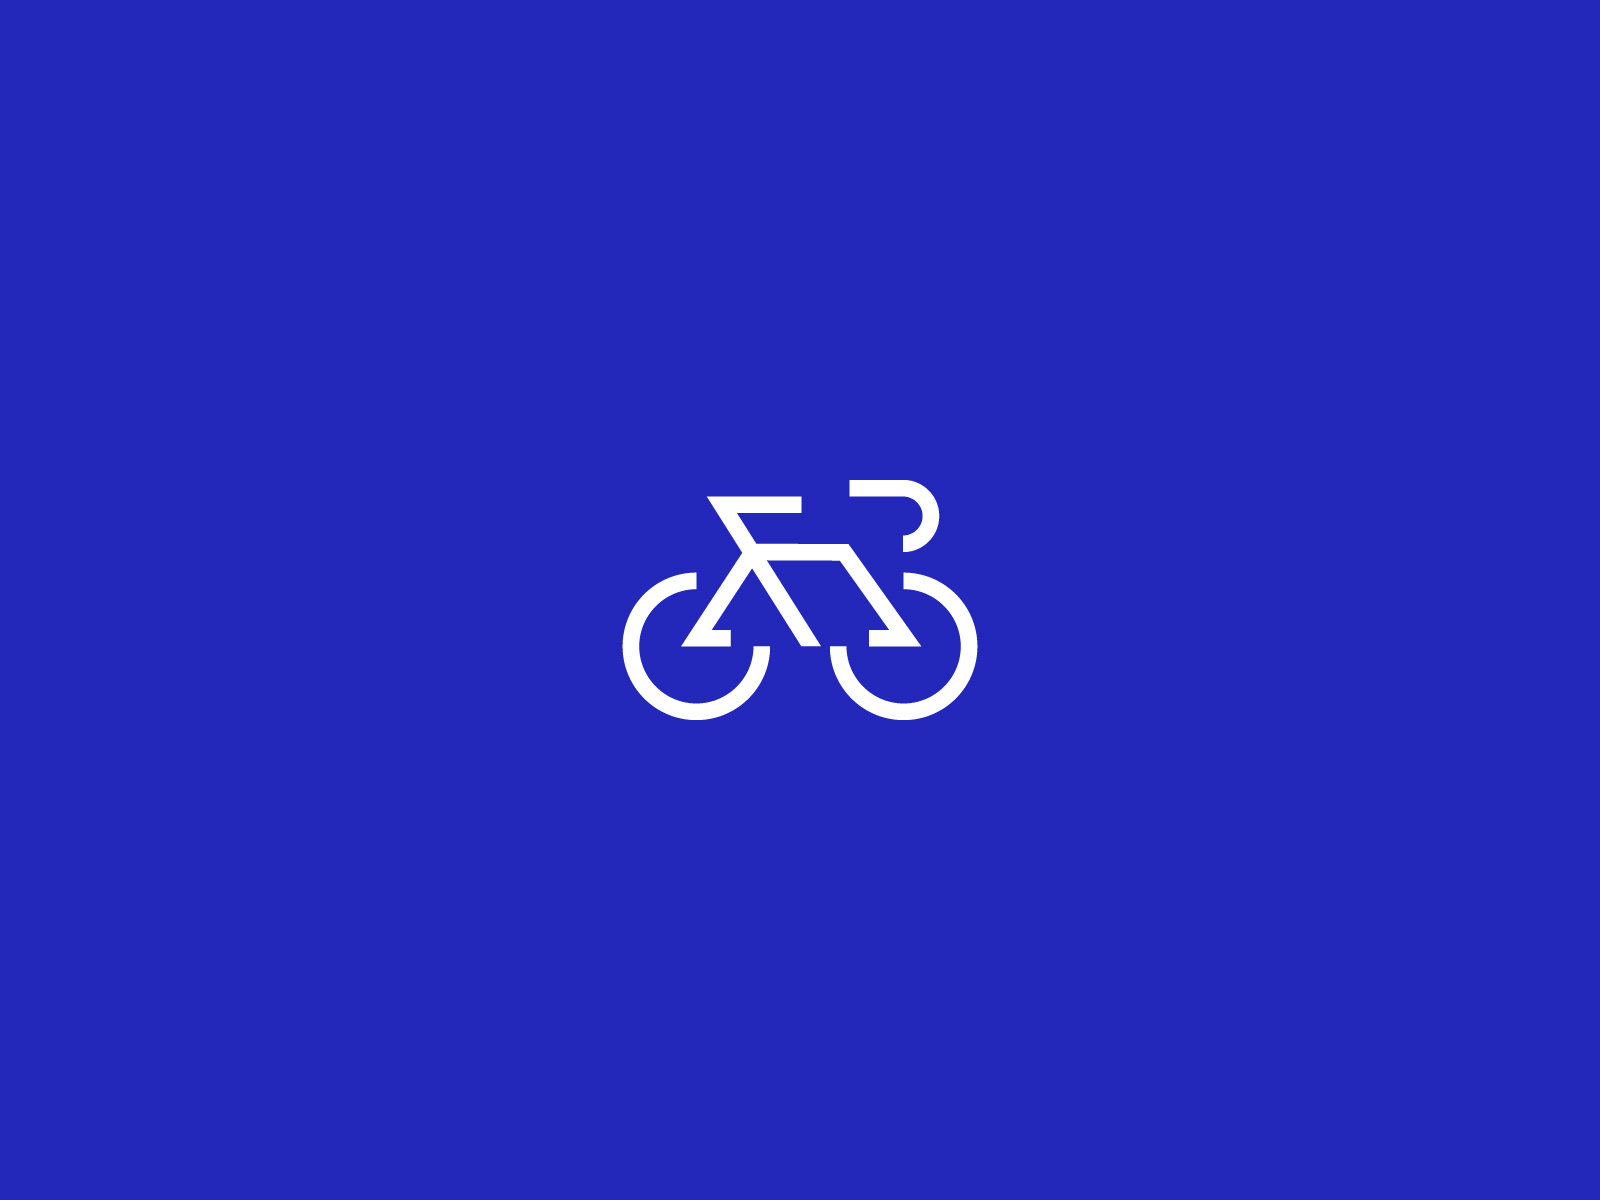 Bikeshed logo concept by creative sandy on Dribbble